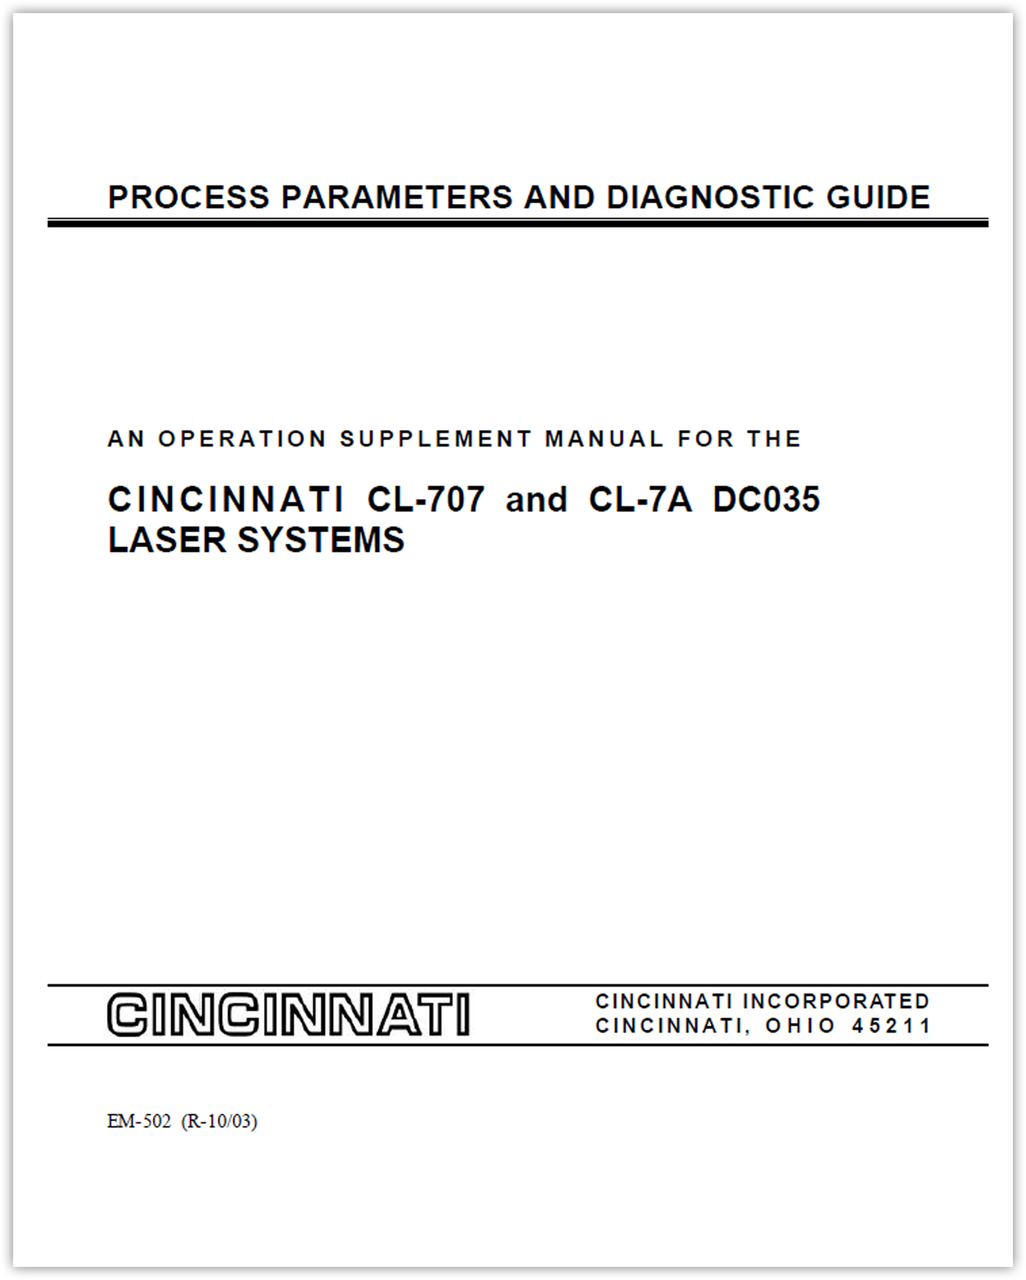 EM-502 (R-10-03) Process Parameters and Diagnostic Guide - An Operation Supplement Manual for the CINCINNATI CL-707 and CL-7A DC035 Laser Systems